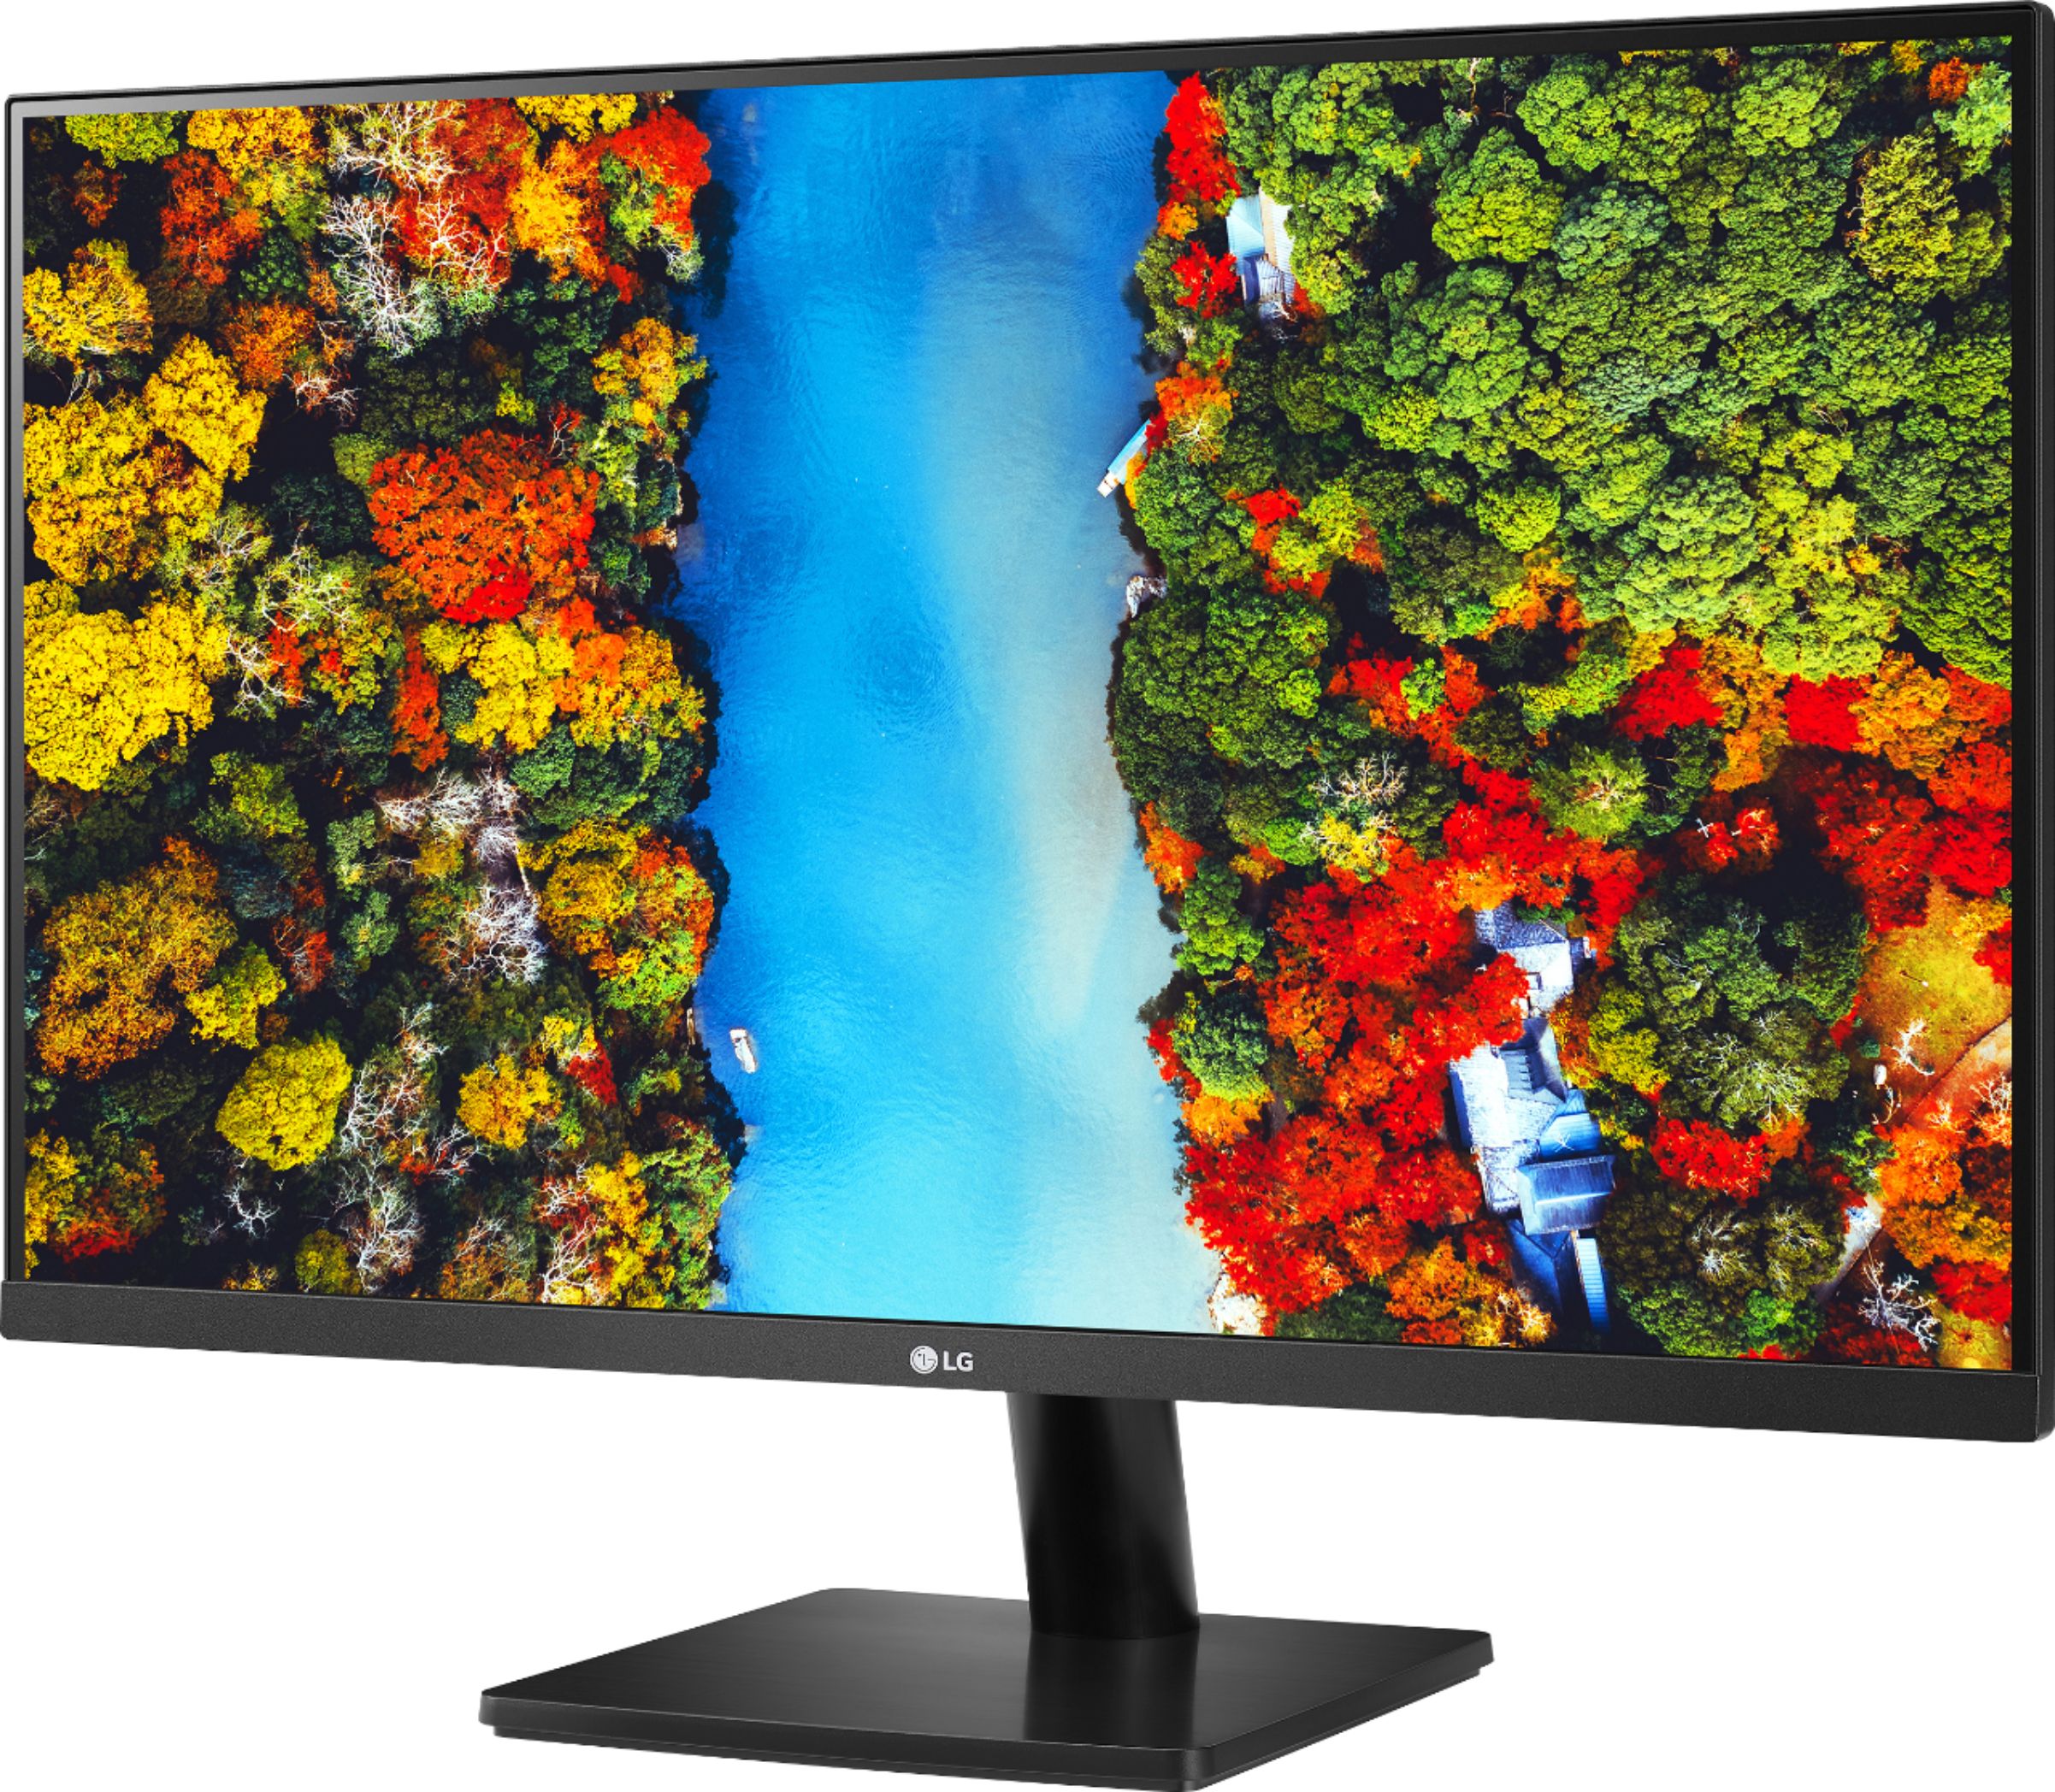 Left View: LG - 27" Full HD IPS Monitor with AMD FreeSync and a 3-Side Virtually Borderless Design - Black